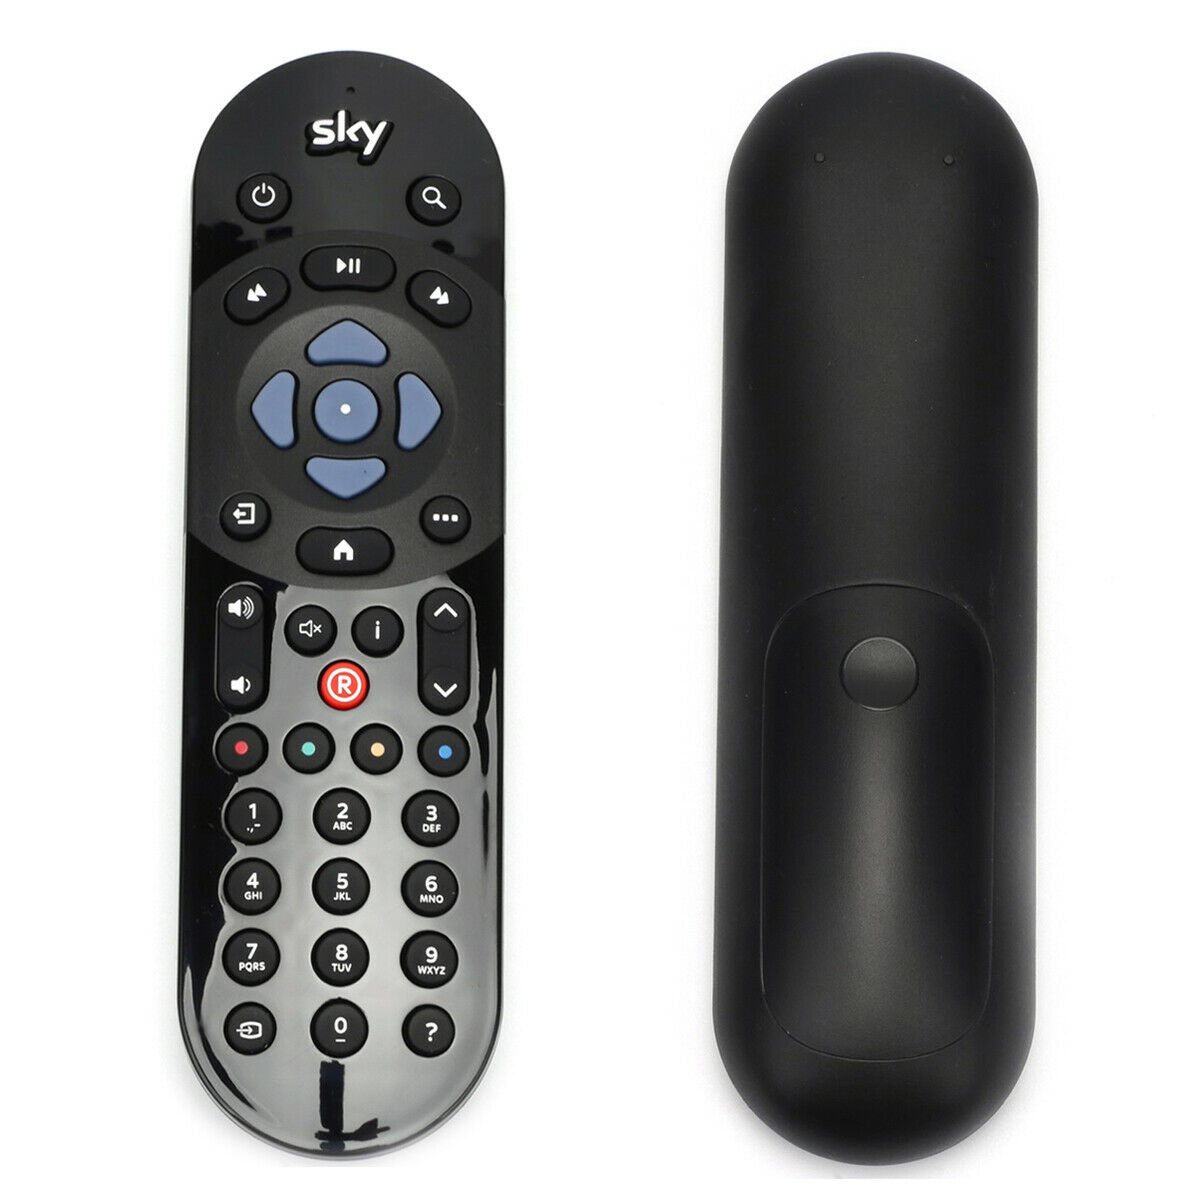 E57065-Universal-Replacement-Infrared-Remote-Control-For-Sky-Q-Version-2-TV-Box-1671331-5